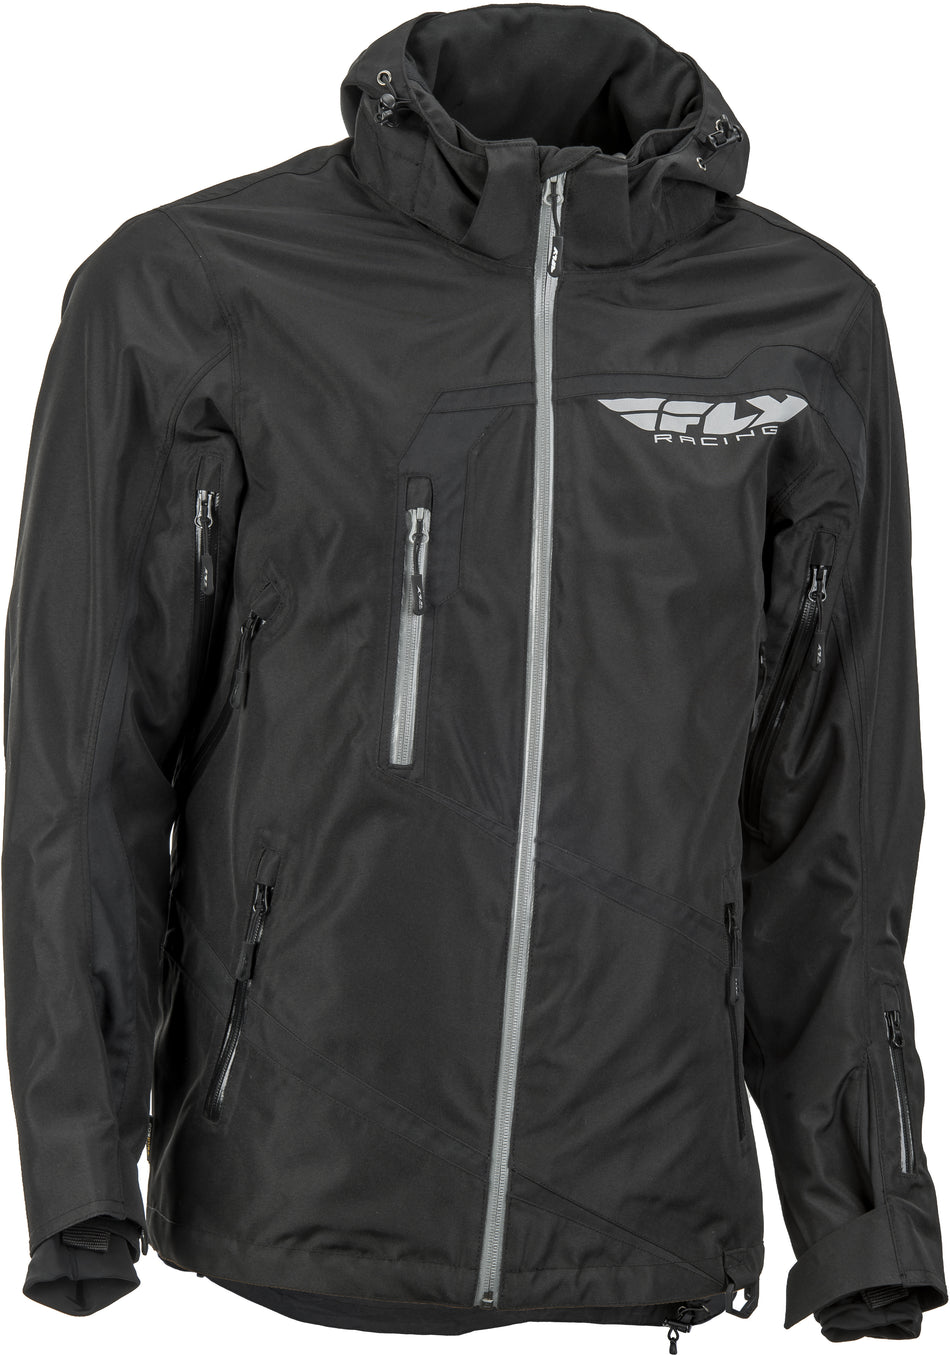 FLY RACING Fly Carbon Jacket Black 3x 470-40403X